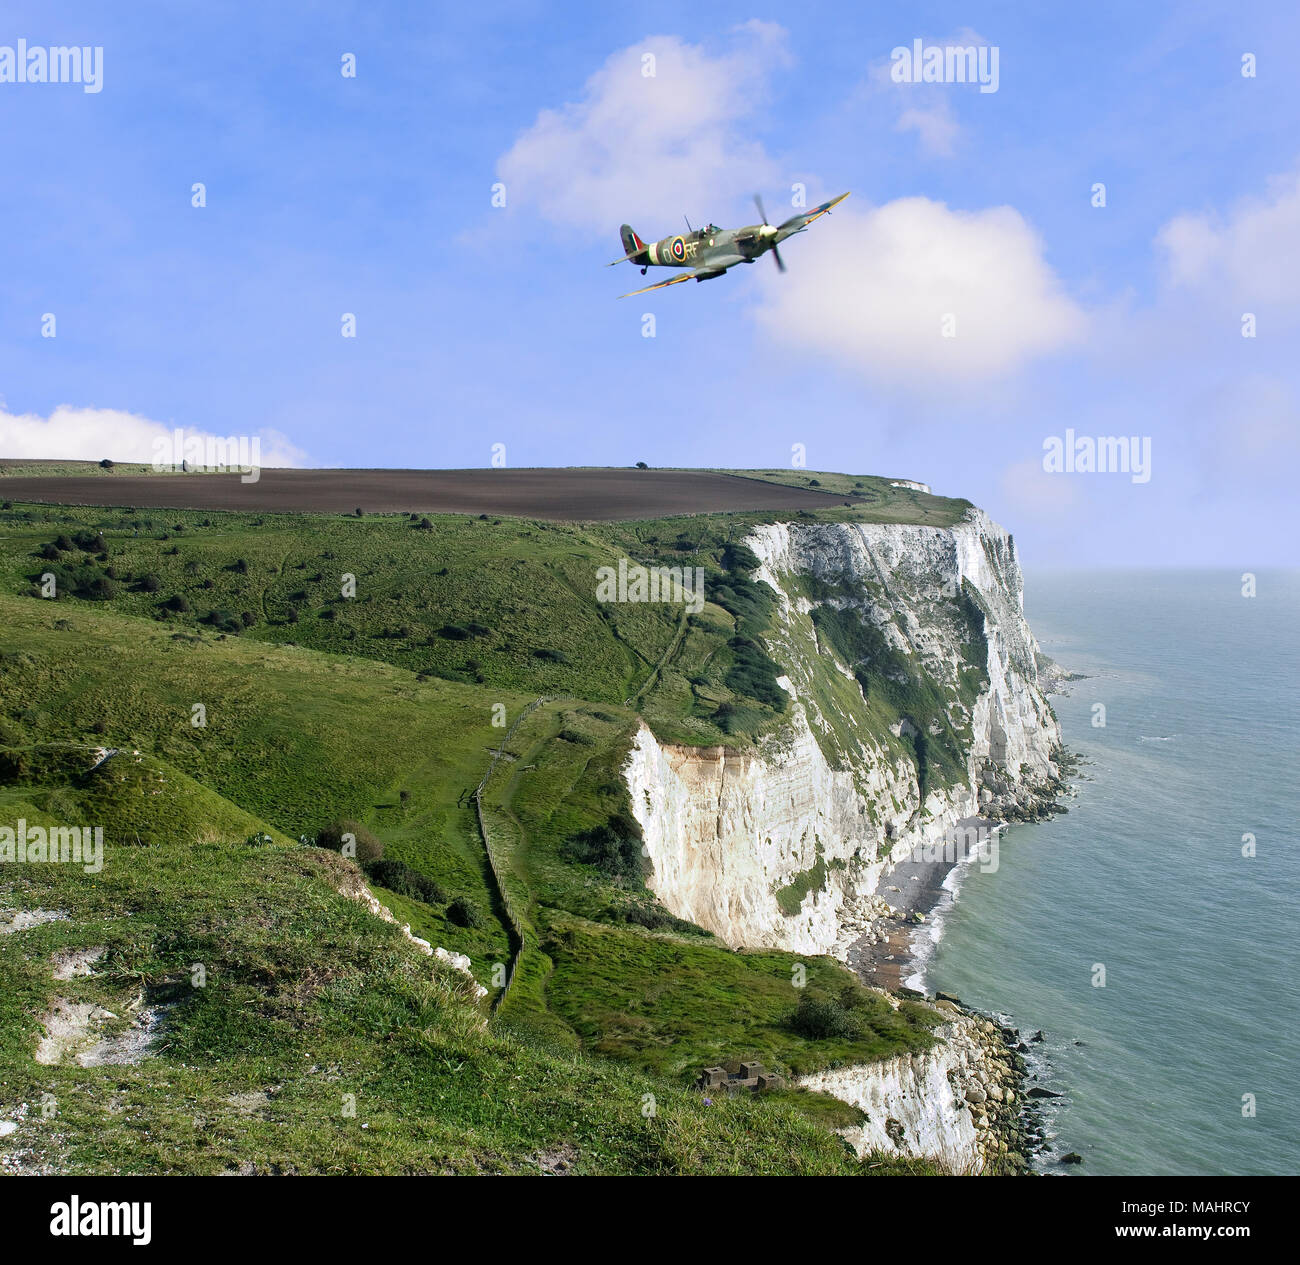 spitfire over the white cliffs of dover Stock Photo